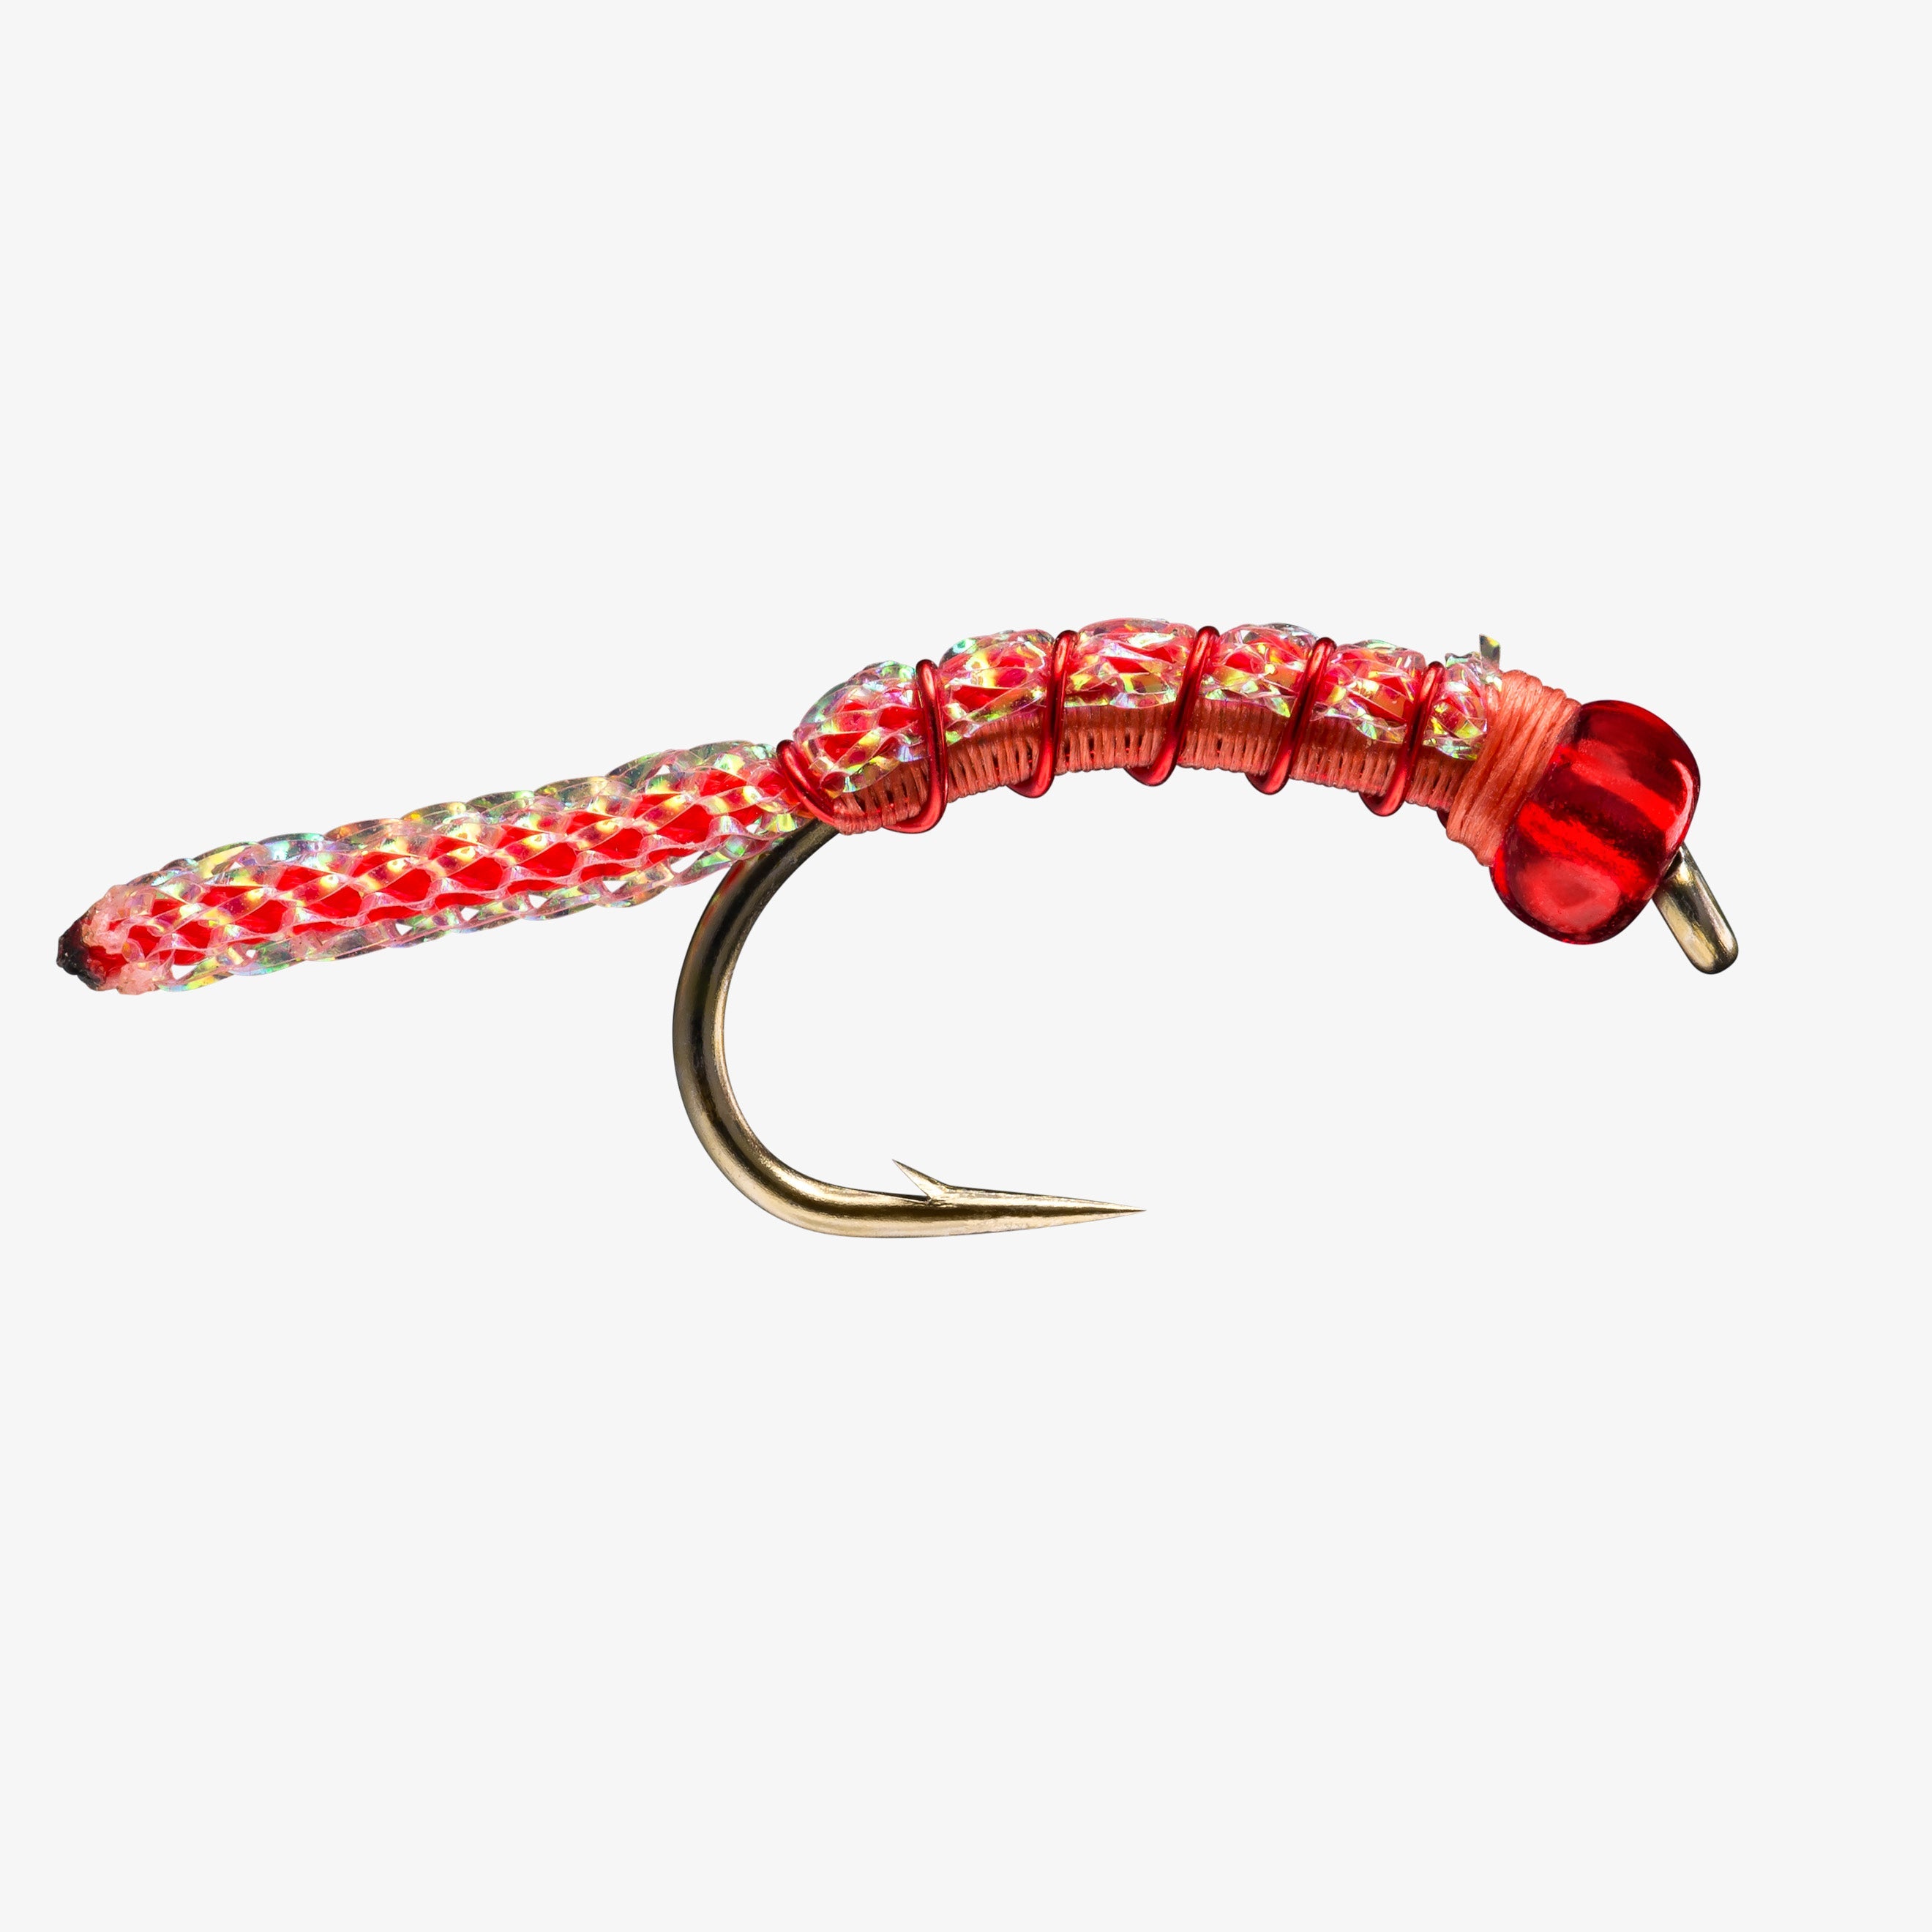 San Juan Worms – Out Fly Fishing